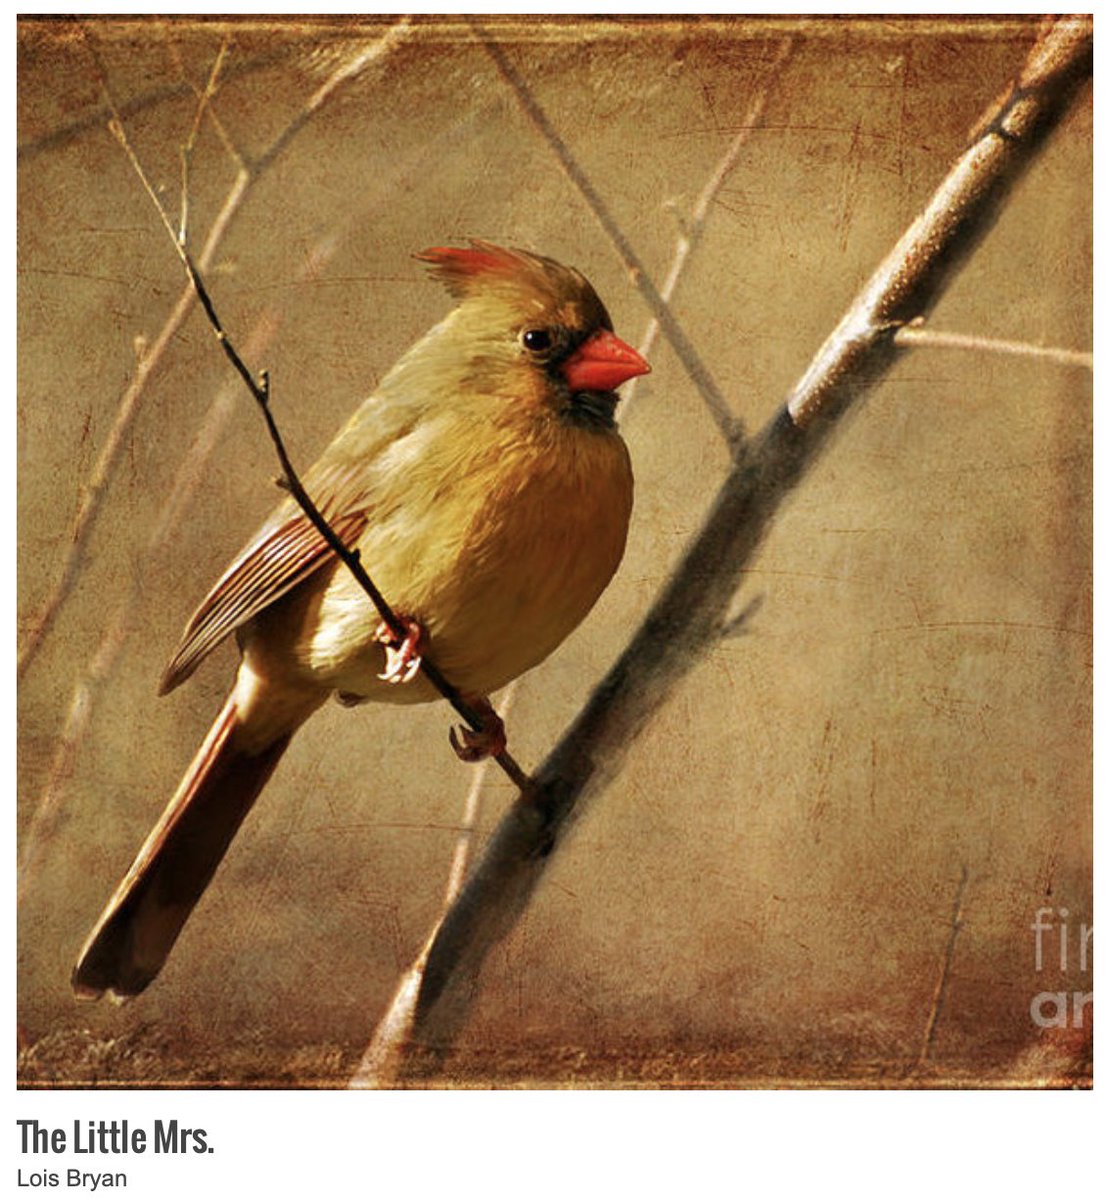 Many thanks to my #FineArtAmerica client from Omaha NE for their purchase yesterday of a 20' x 20' print of 'The Little Mrs.'  I hope you enjoy it very much!
fineartamerica.com/saleannounceme… #art #giftideas #birds #cardinals #femalecardinals #homedecor #LoisBryan #Pixels #wildlife #nature